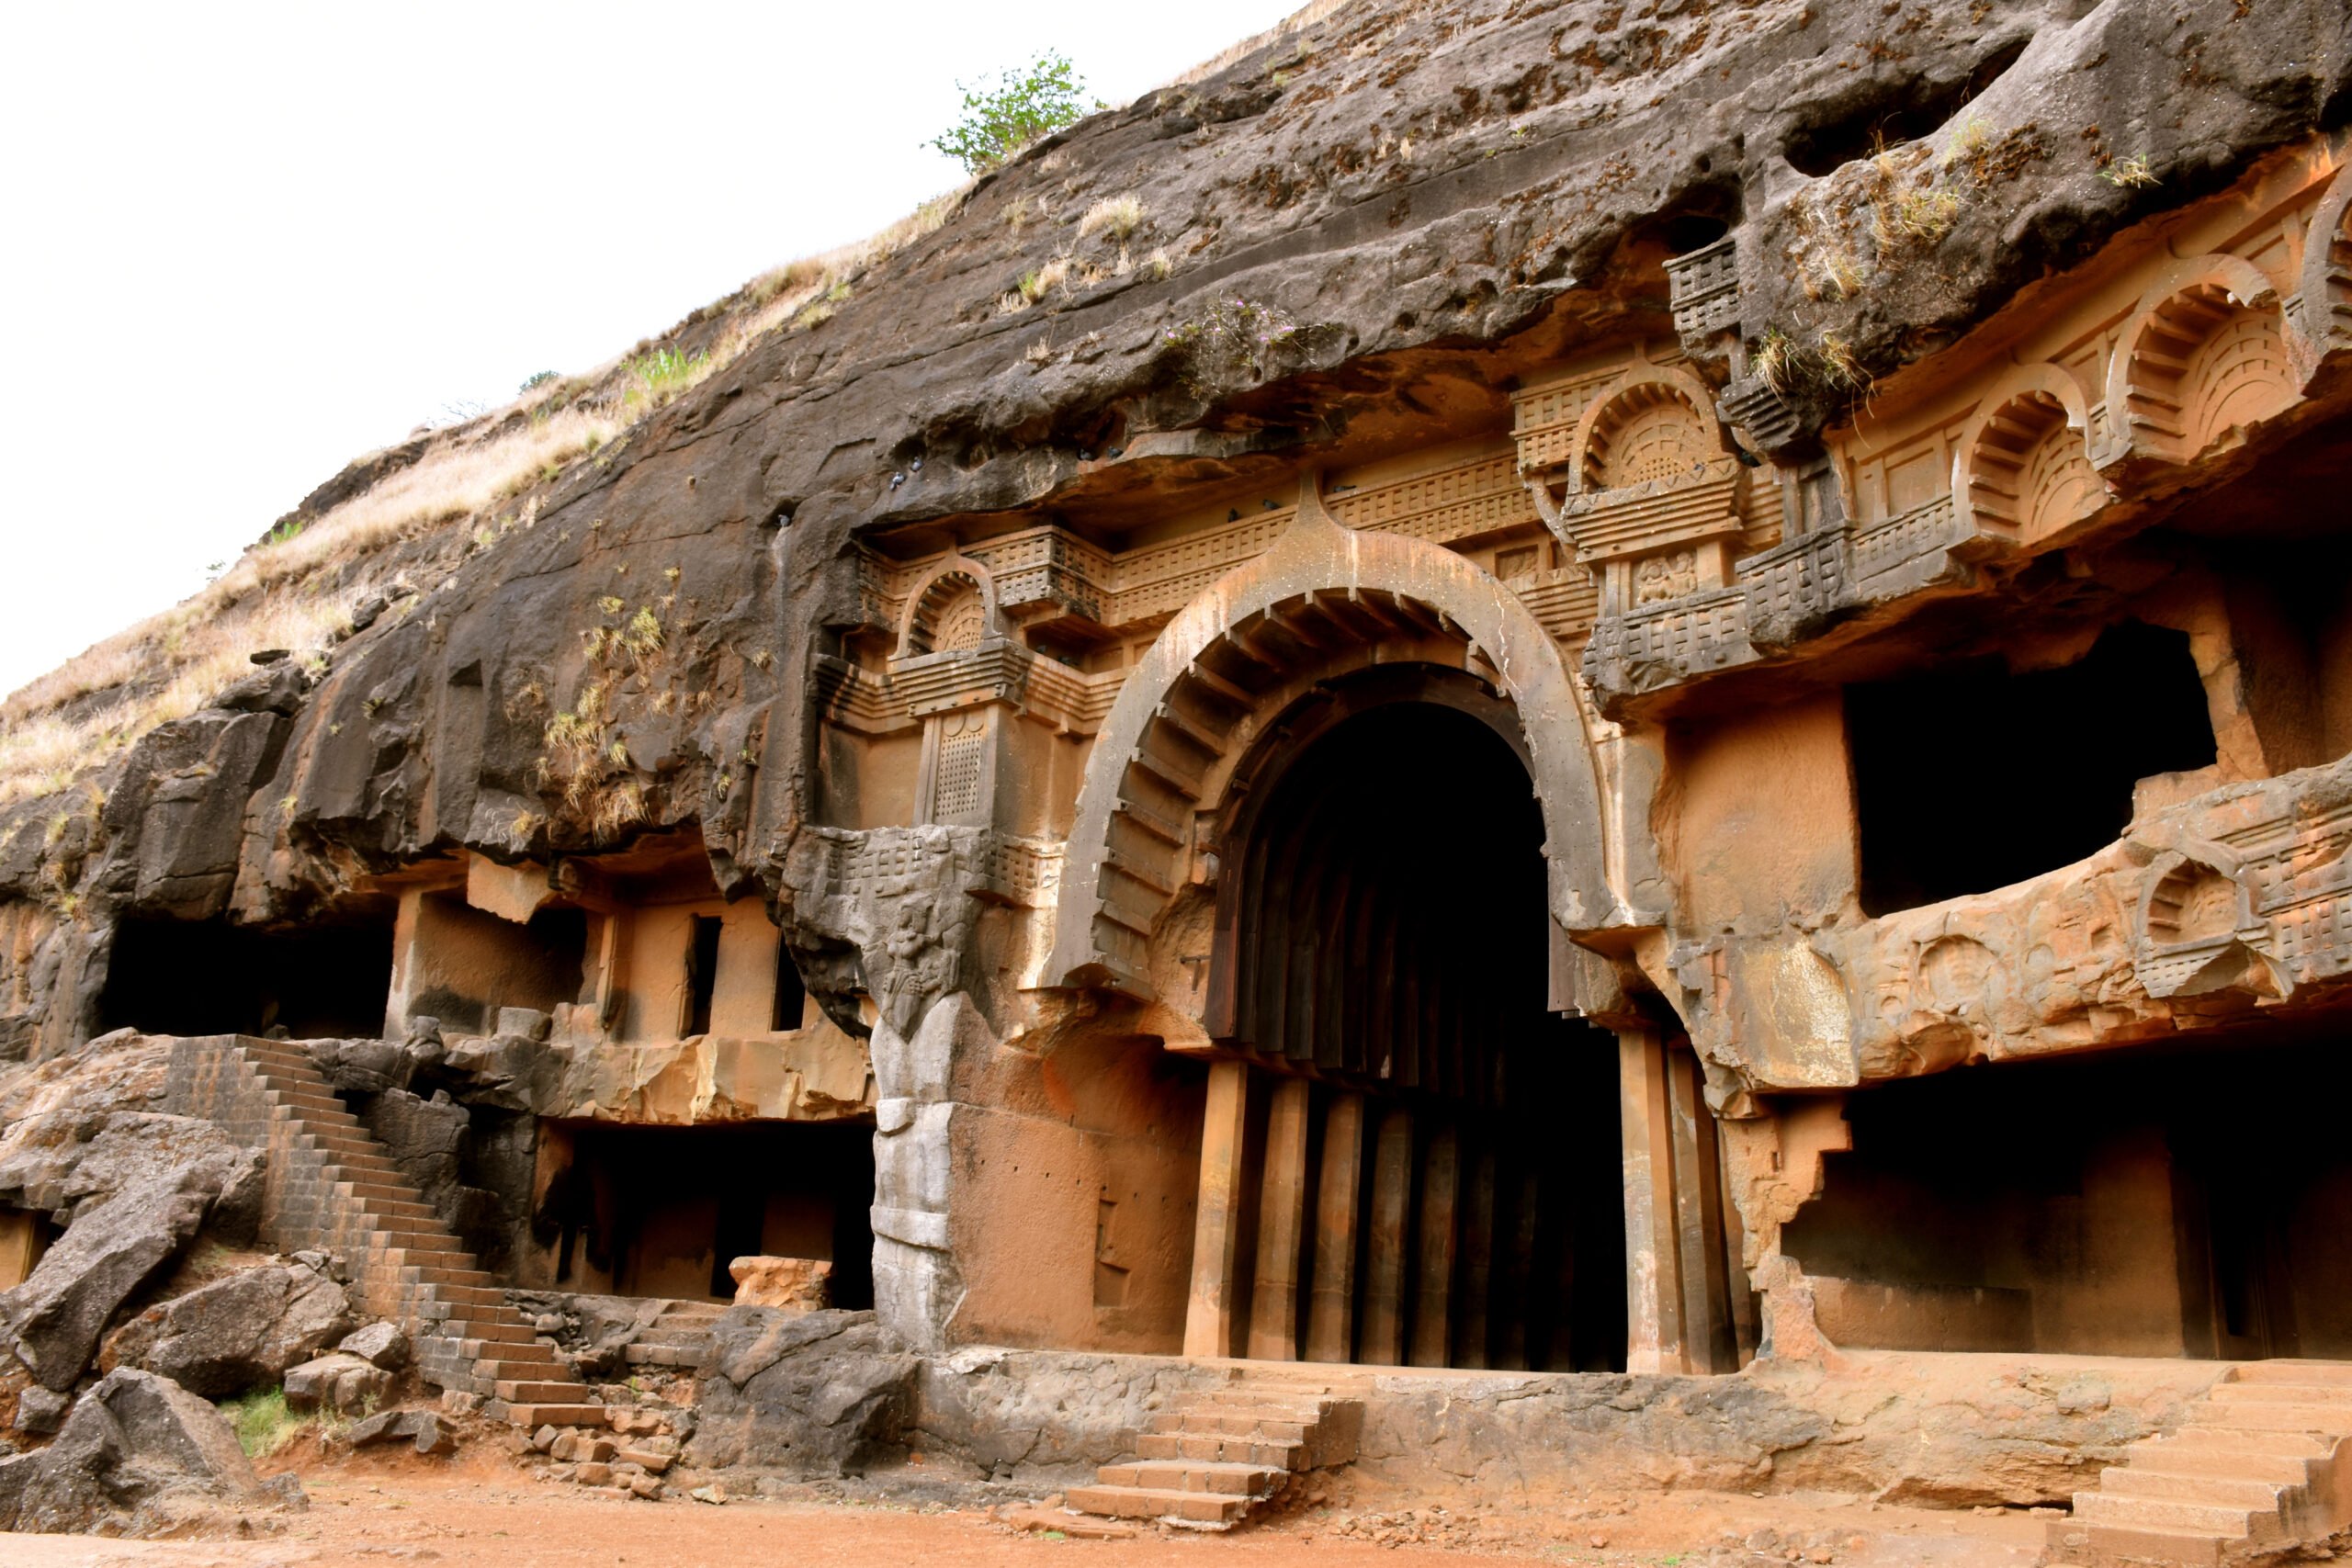 Marvel At Residences Of Monks Of The First Century In Our Karla And Bhaja Caves Tour